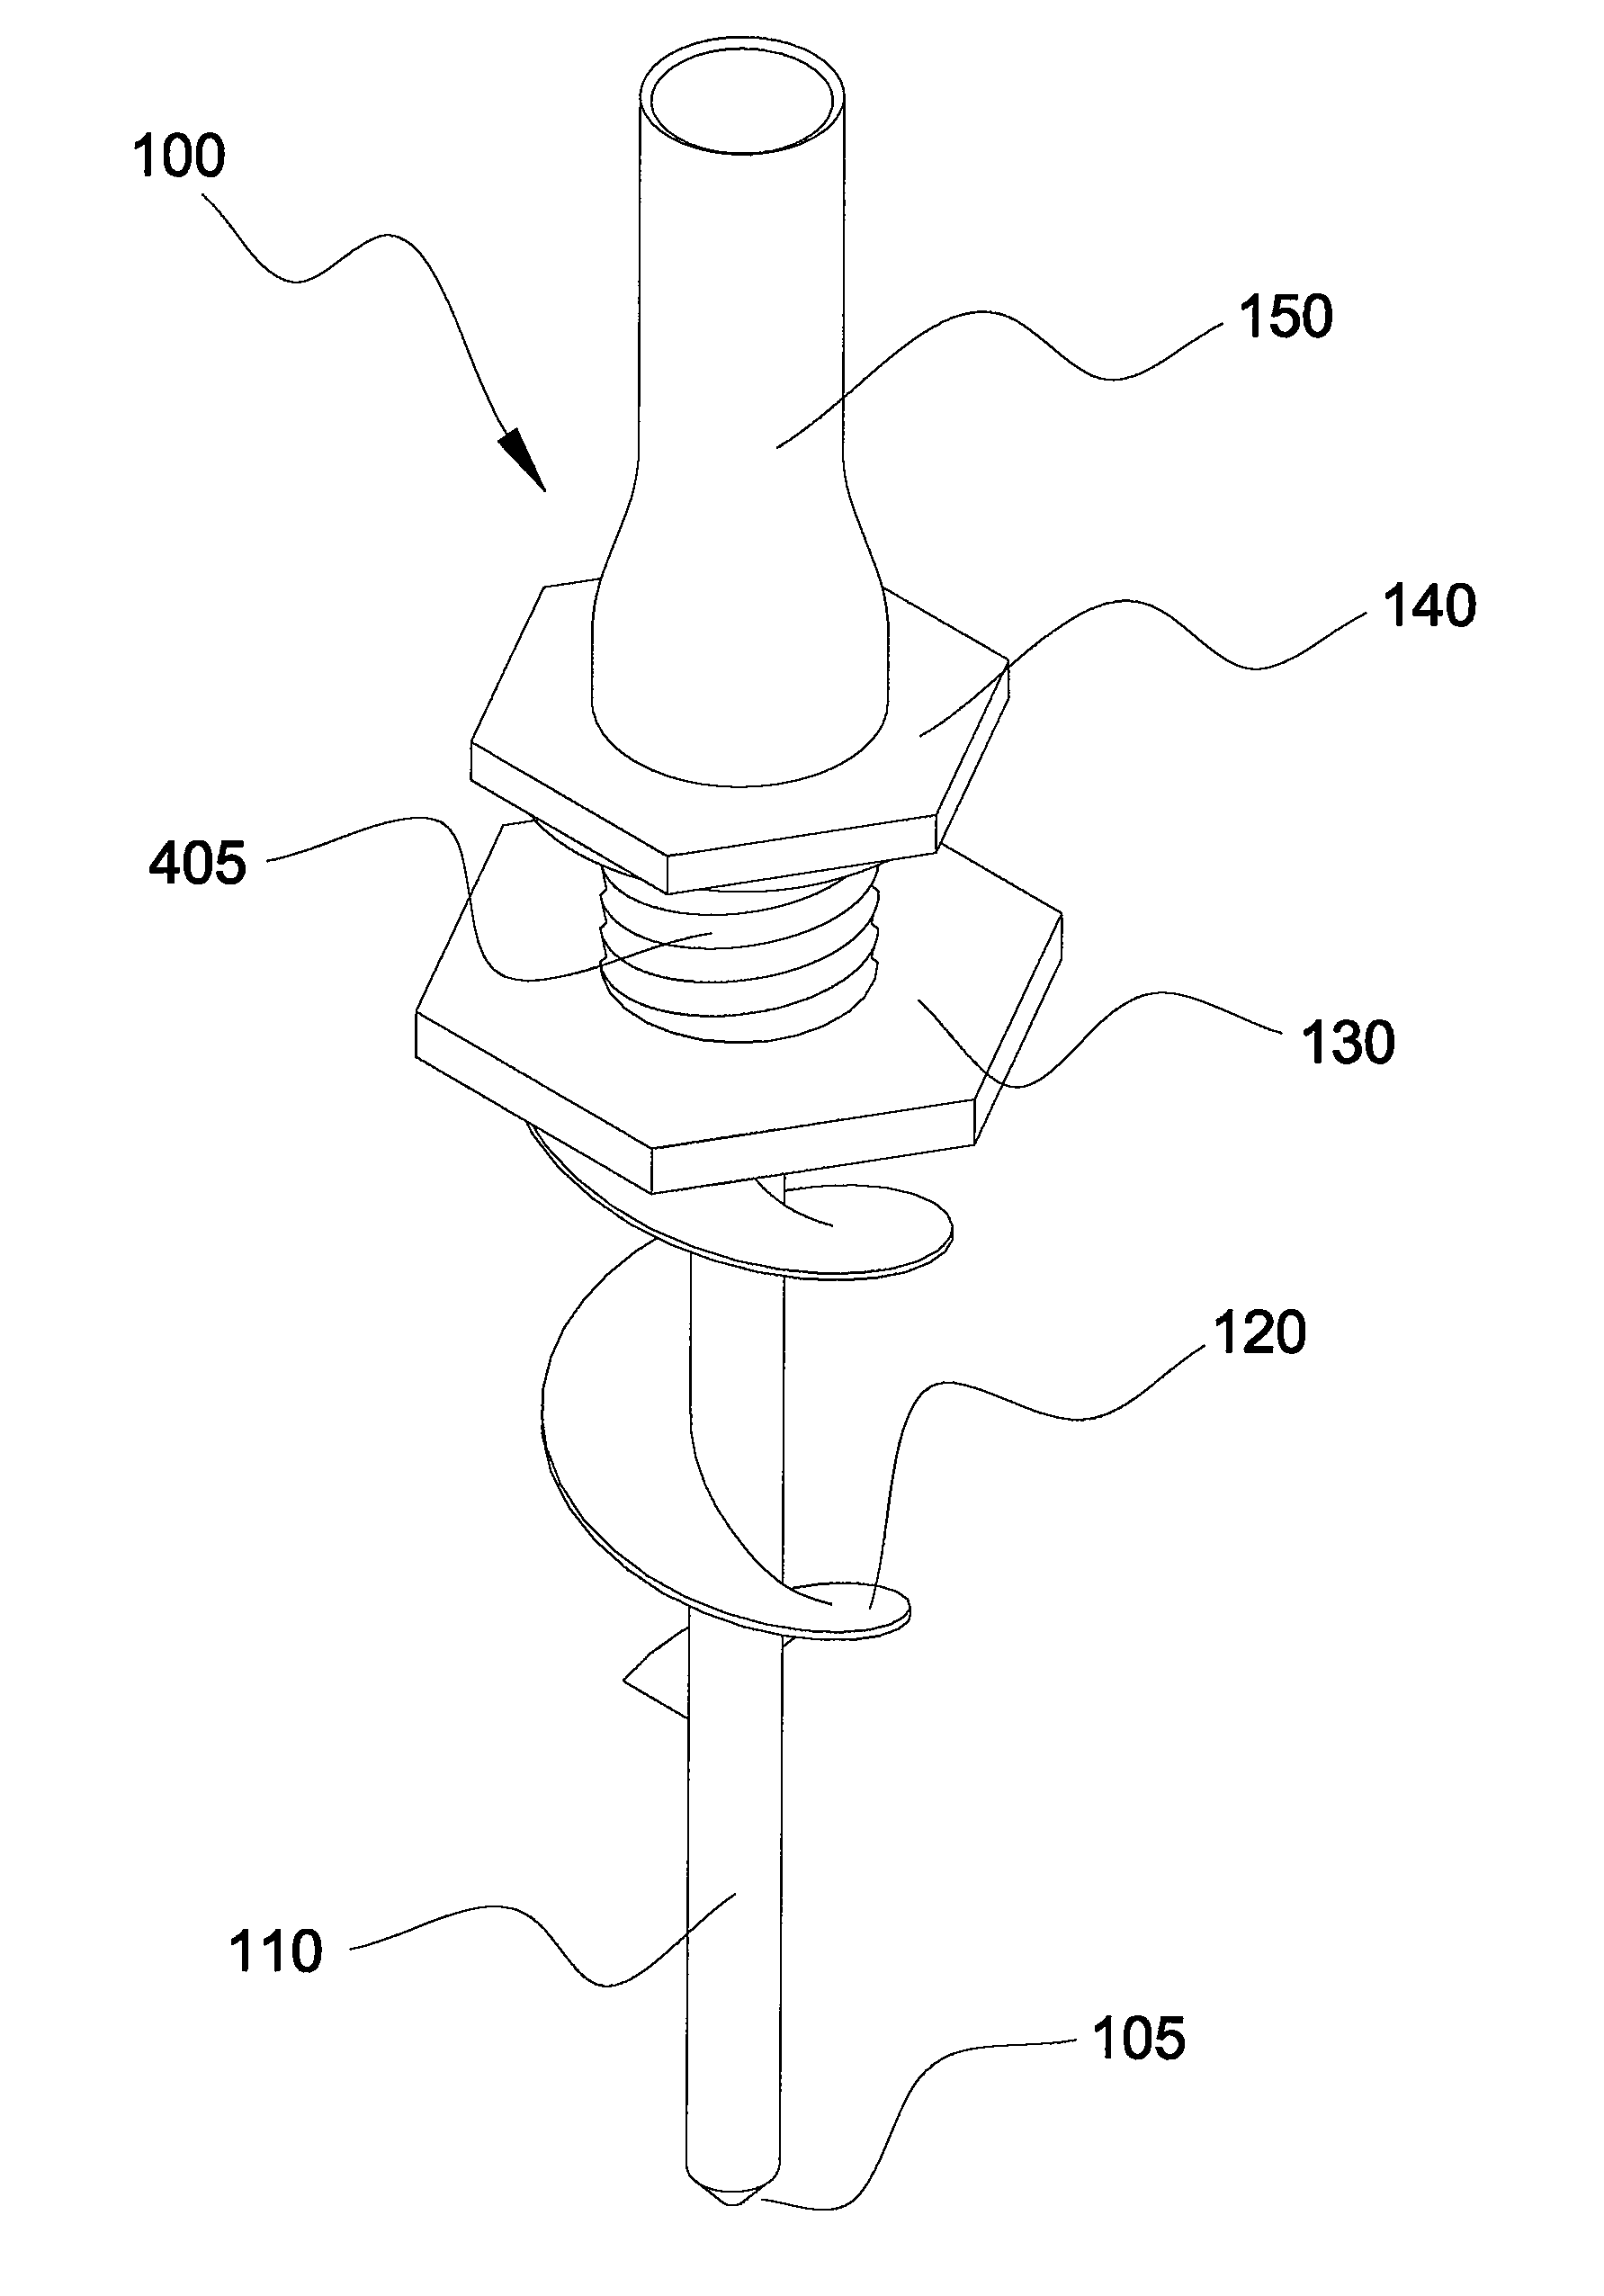 Golf tee placement and practice apparatus and system